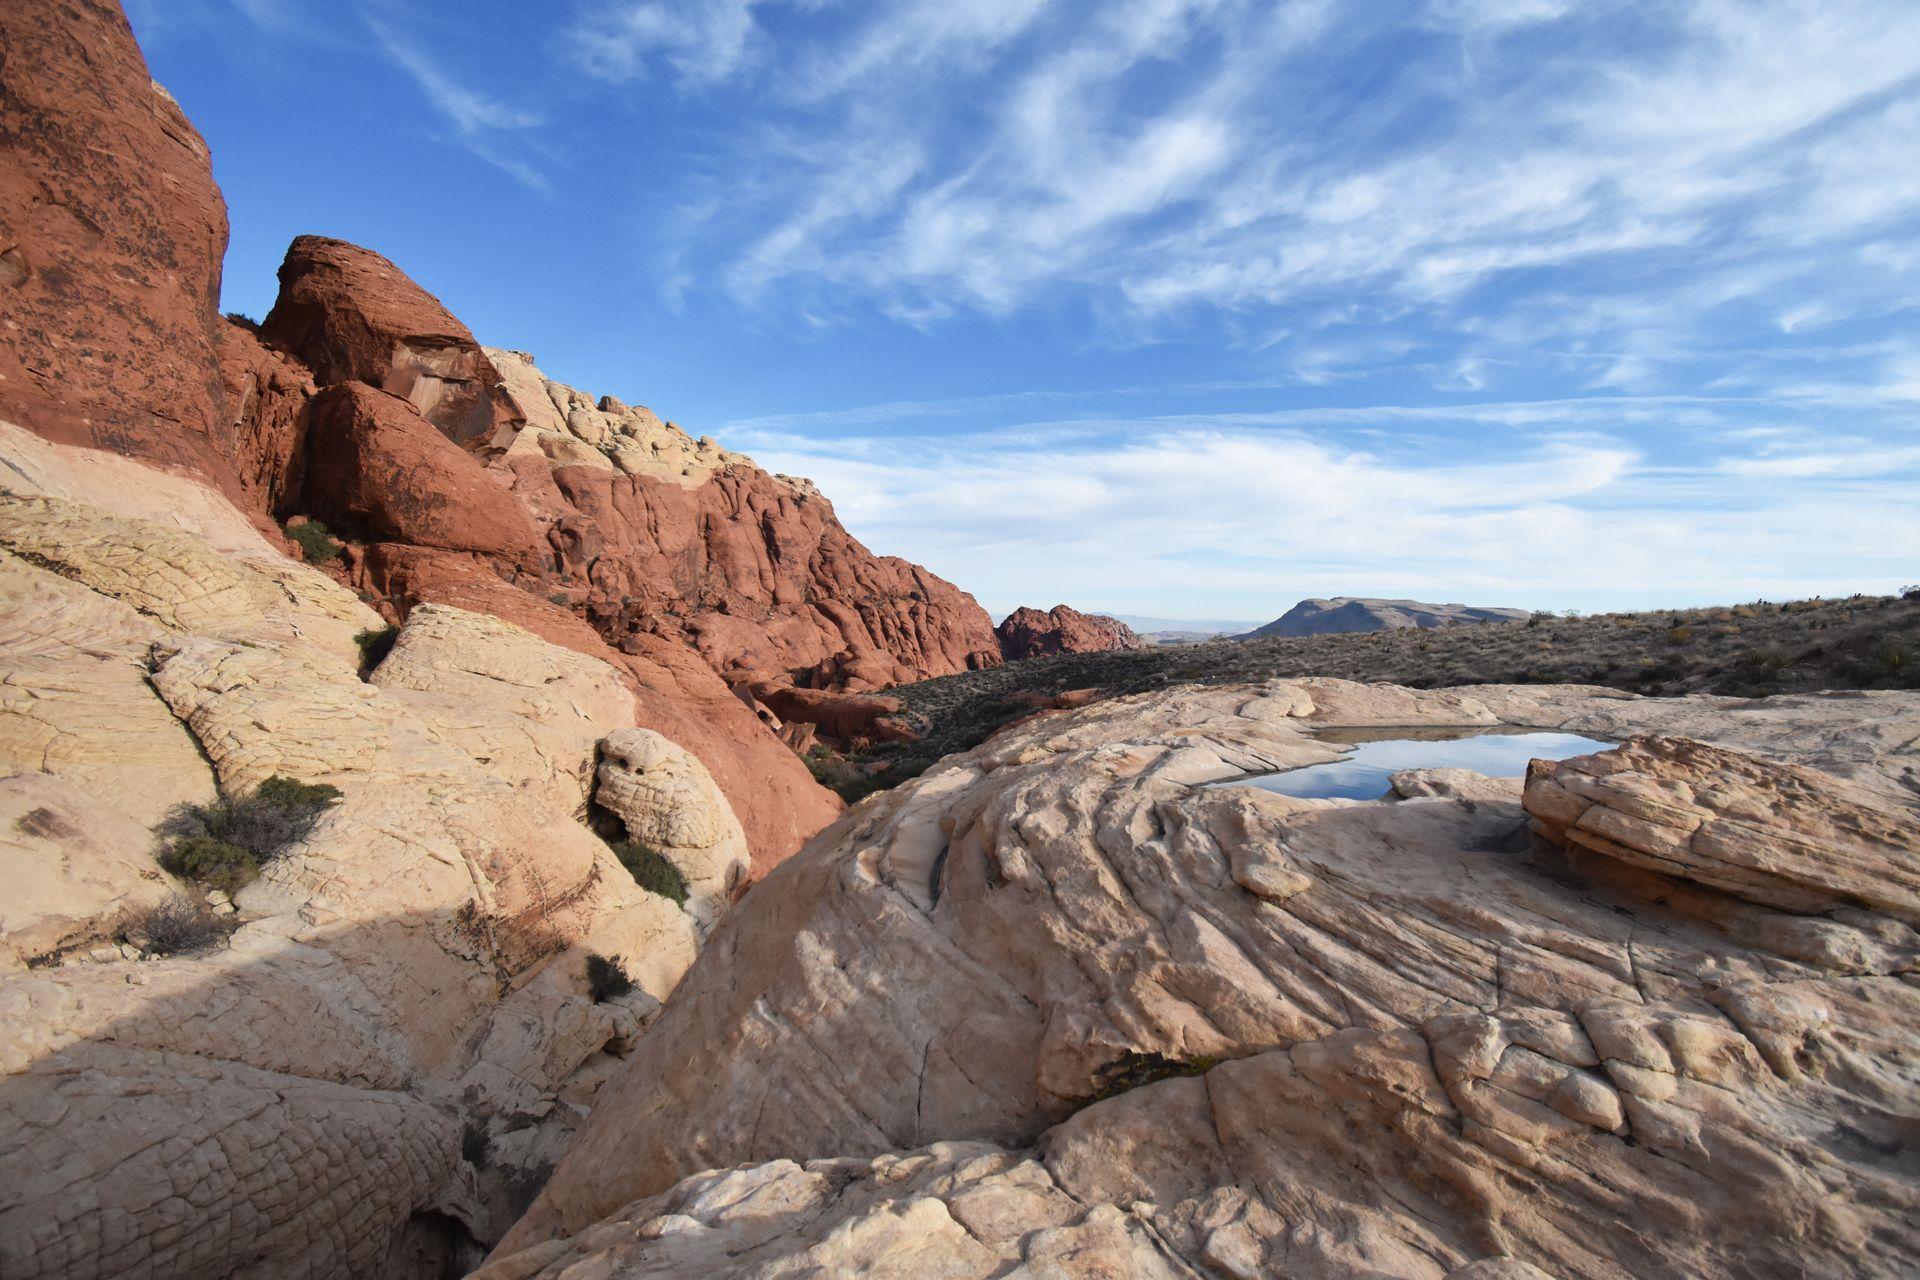 Orange rocks with a pool of water in the Red Rock Canyon Conservation Area.